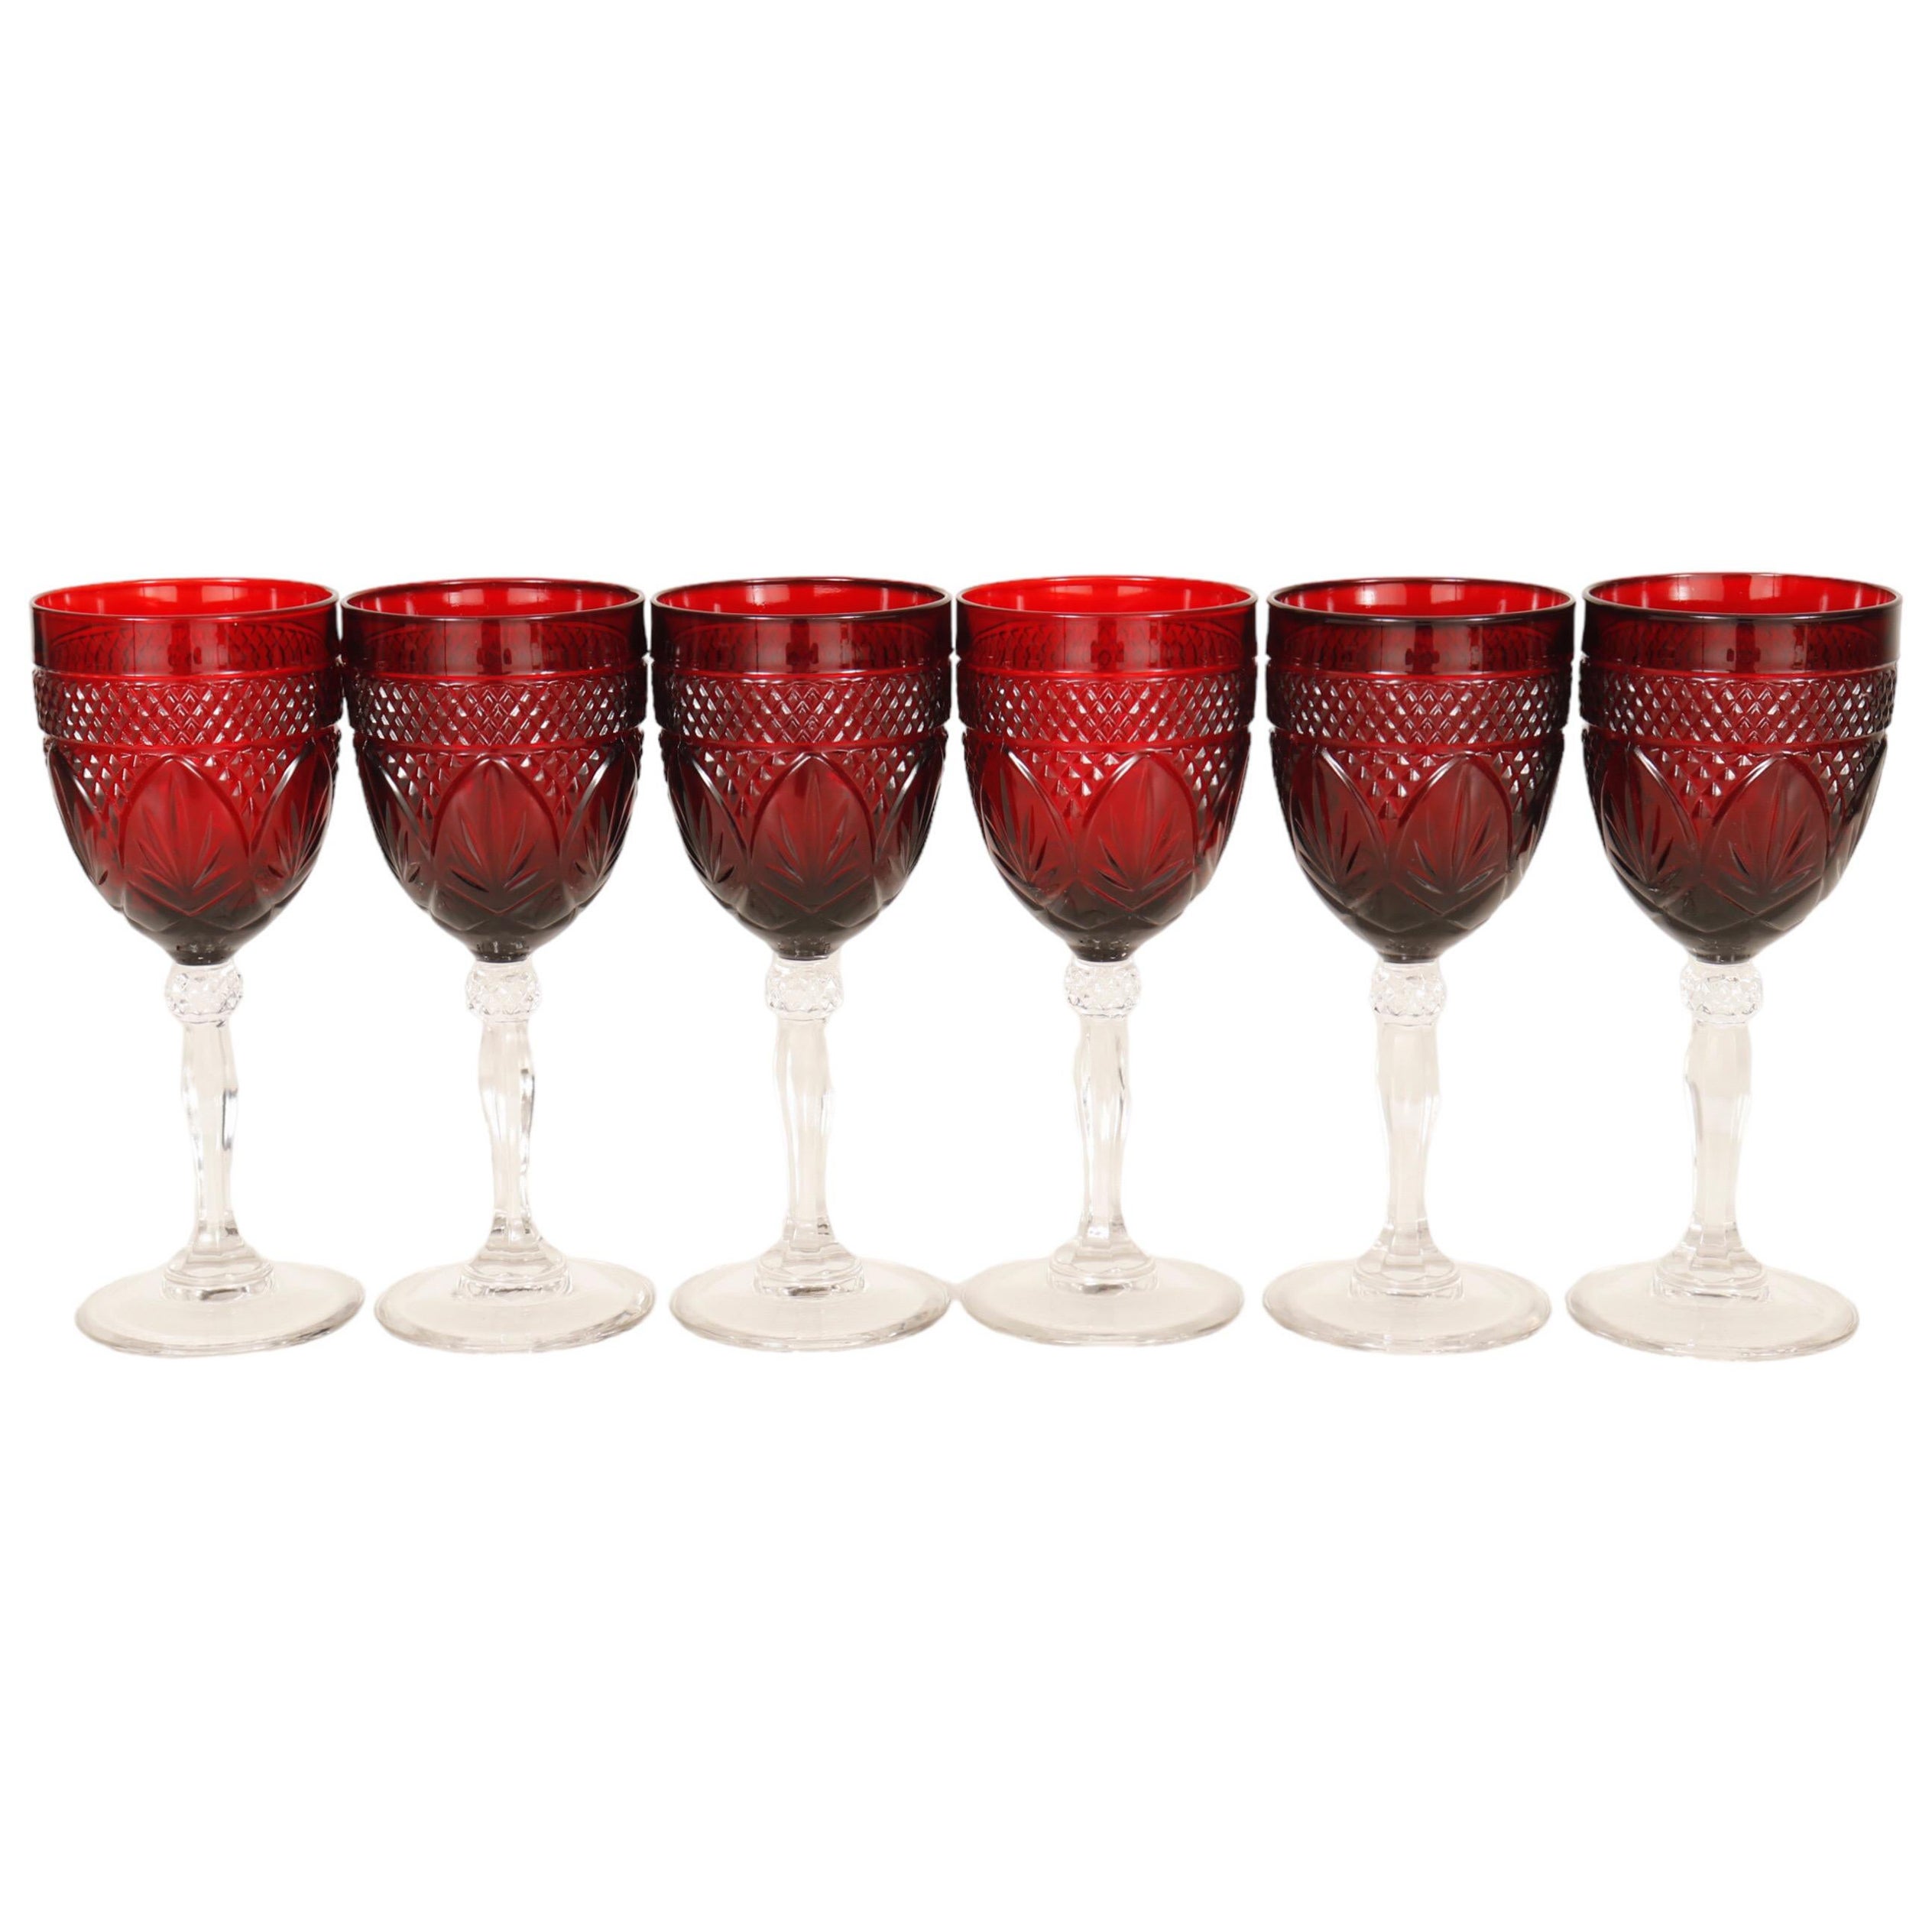 Cristal D'Arques Ruby Wine Glasses - Set of 6 For Sale